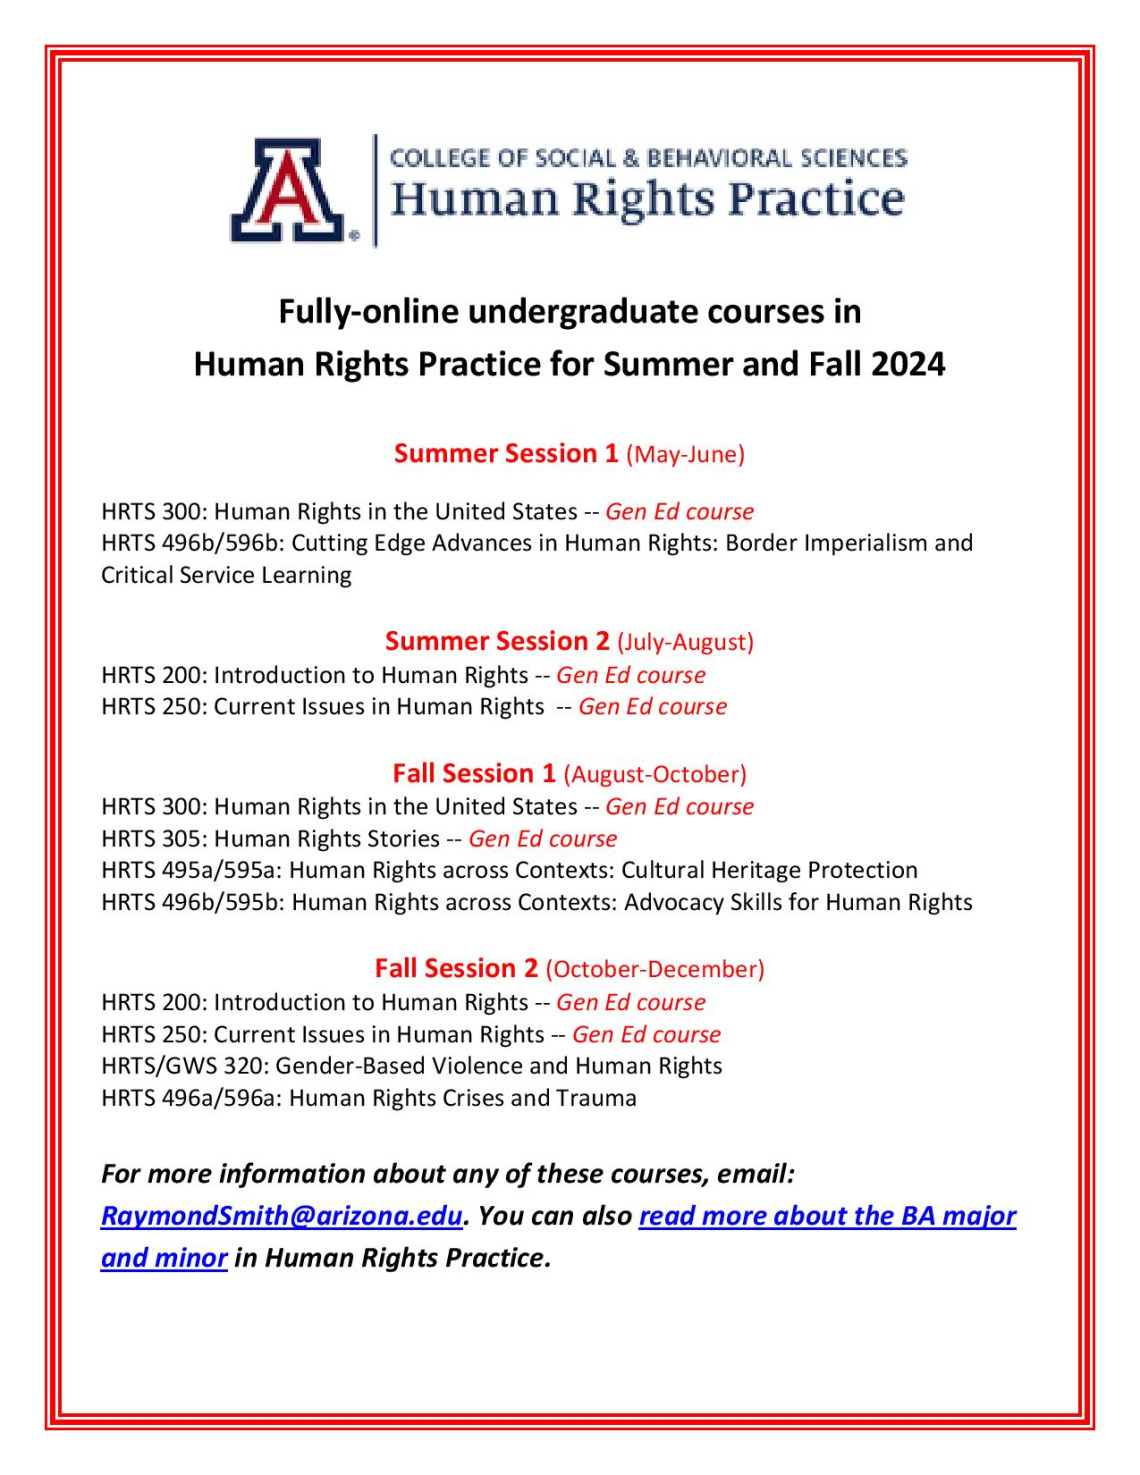 Summer and Fall 2024 Human Rights Practice undergraduate courses